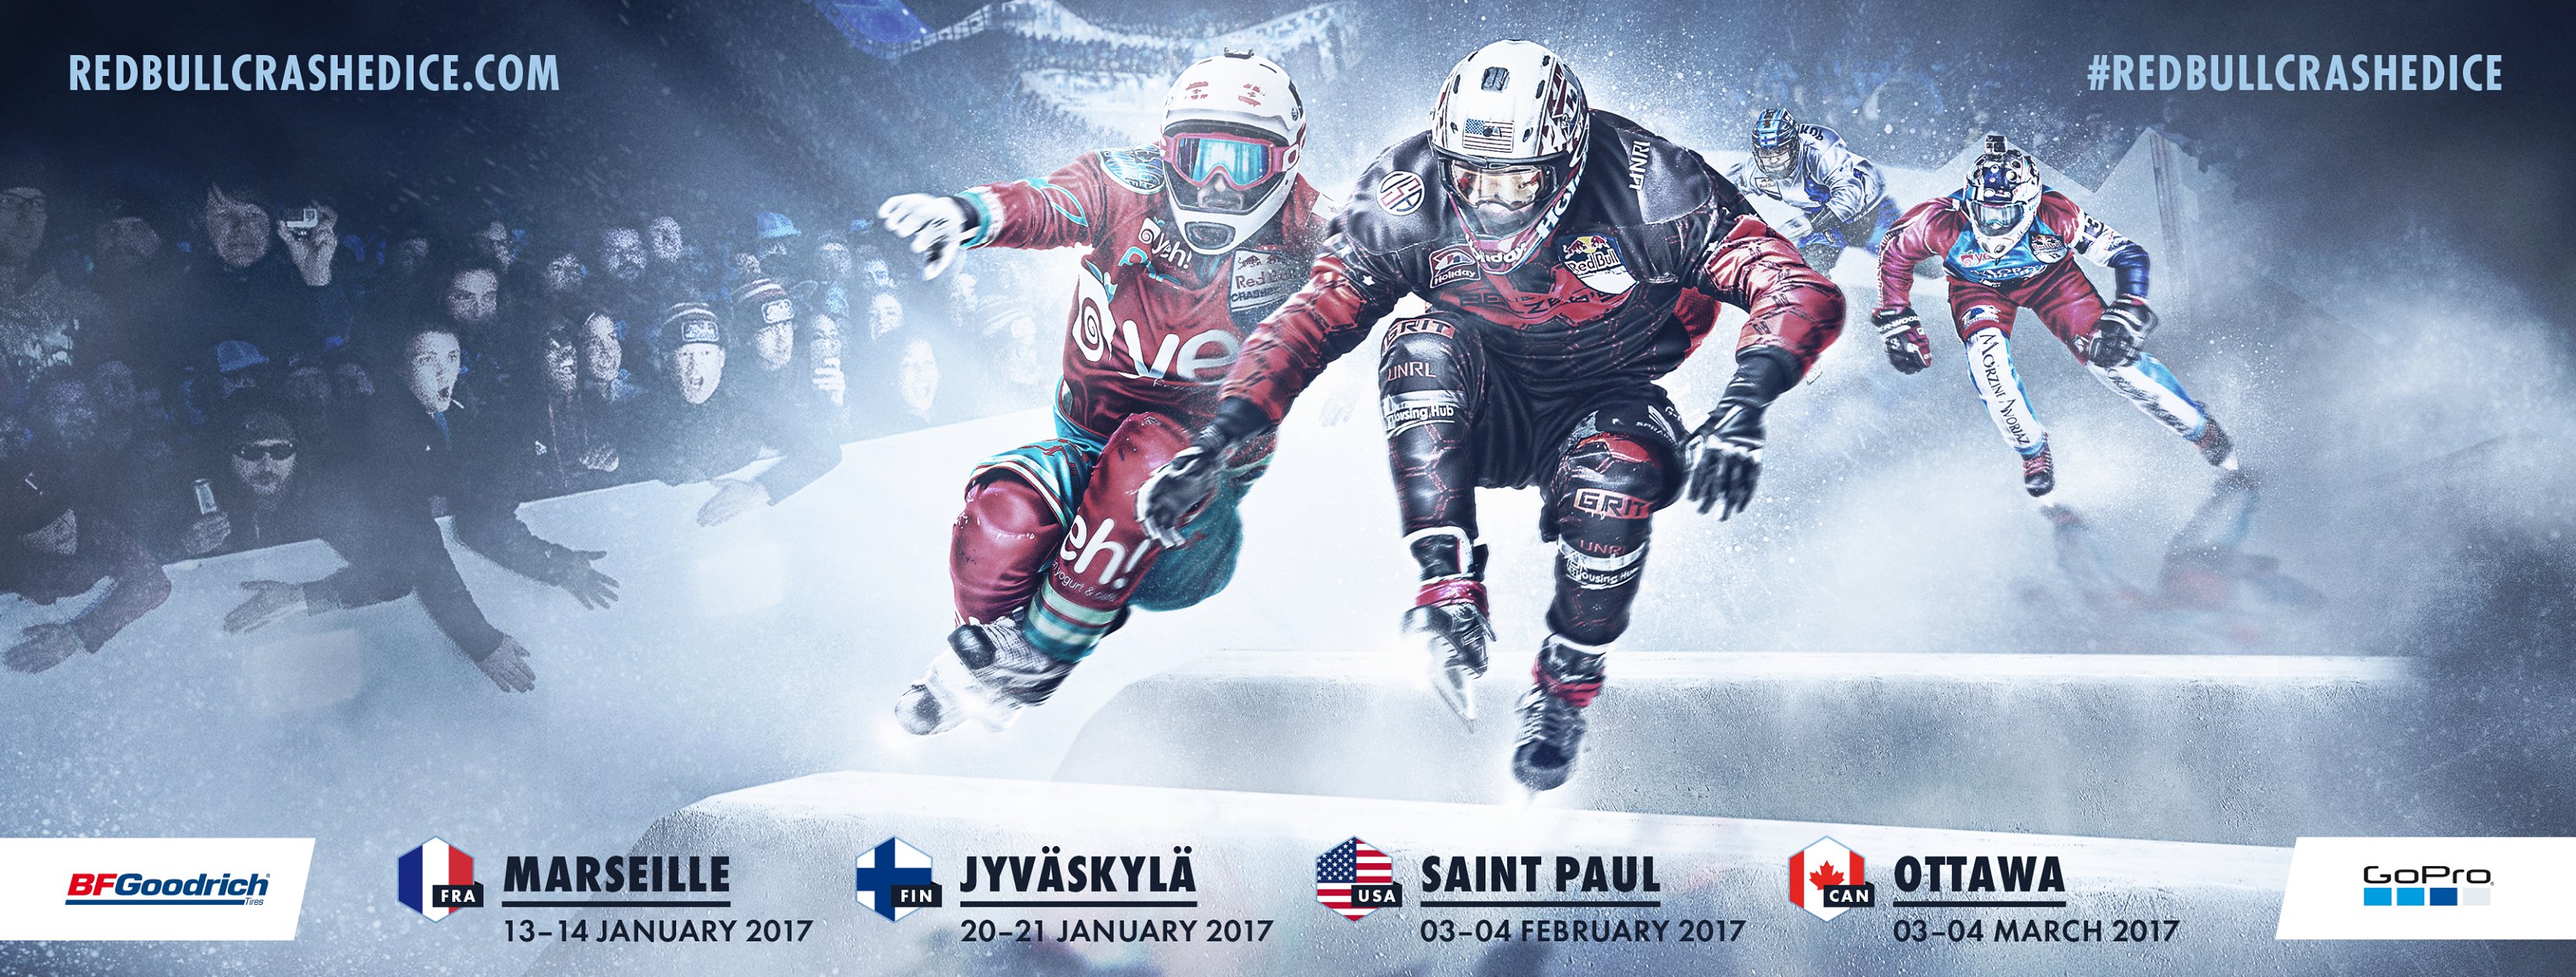 red-bull-crashed-ice